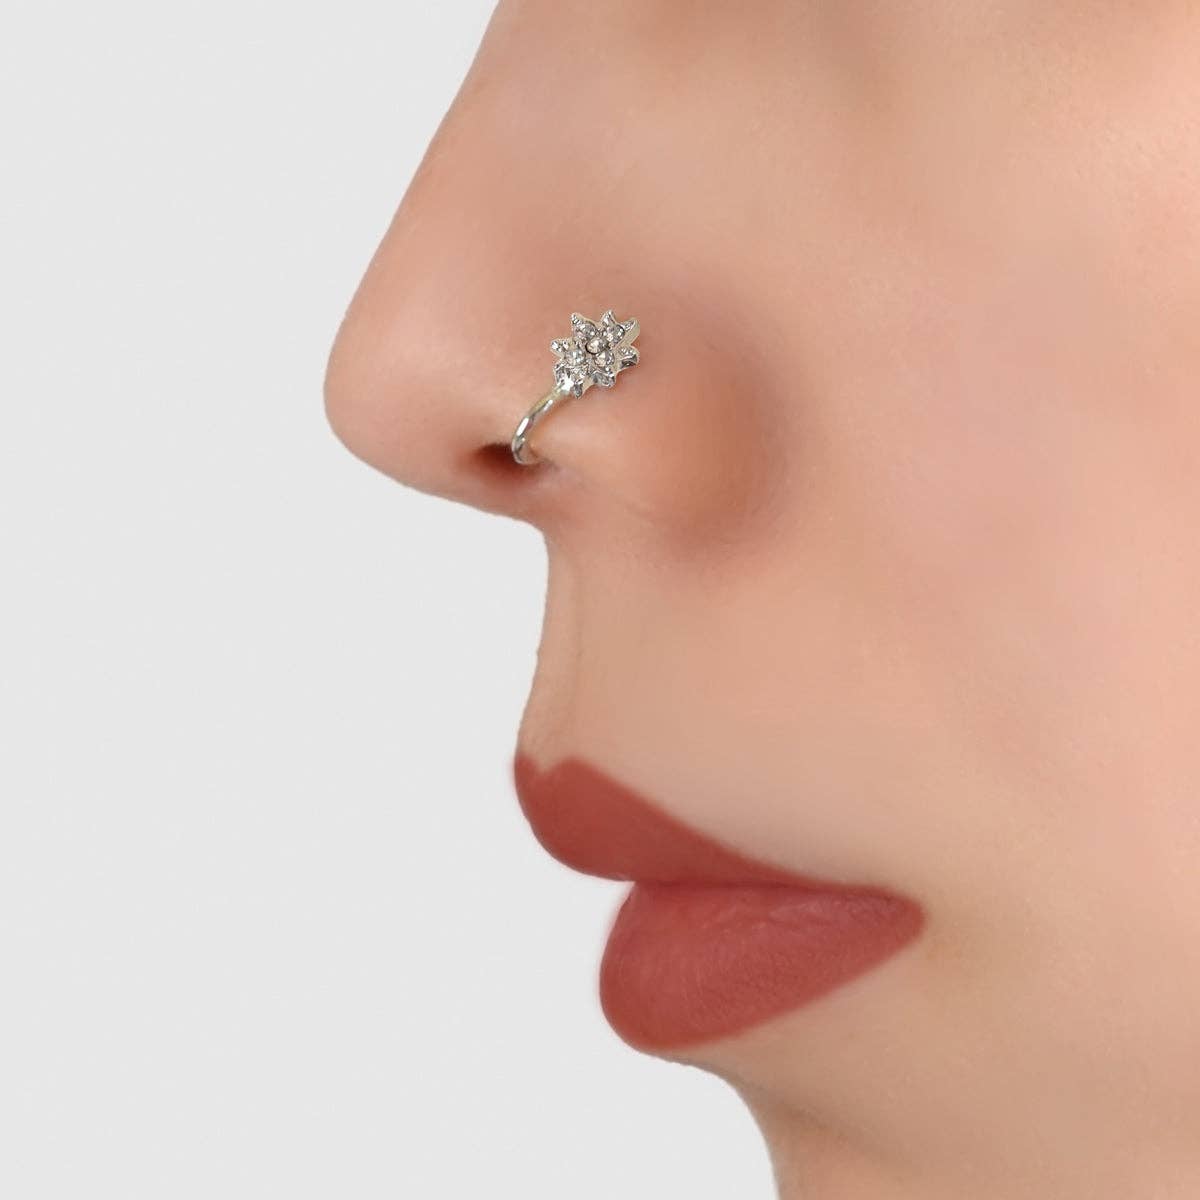 What Type of Nose Ring Stays In The Best?